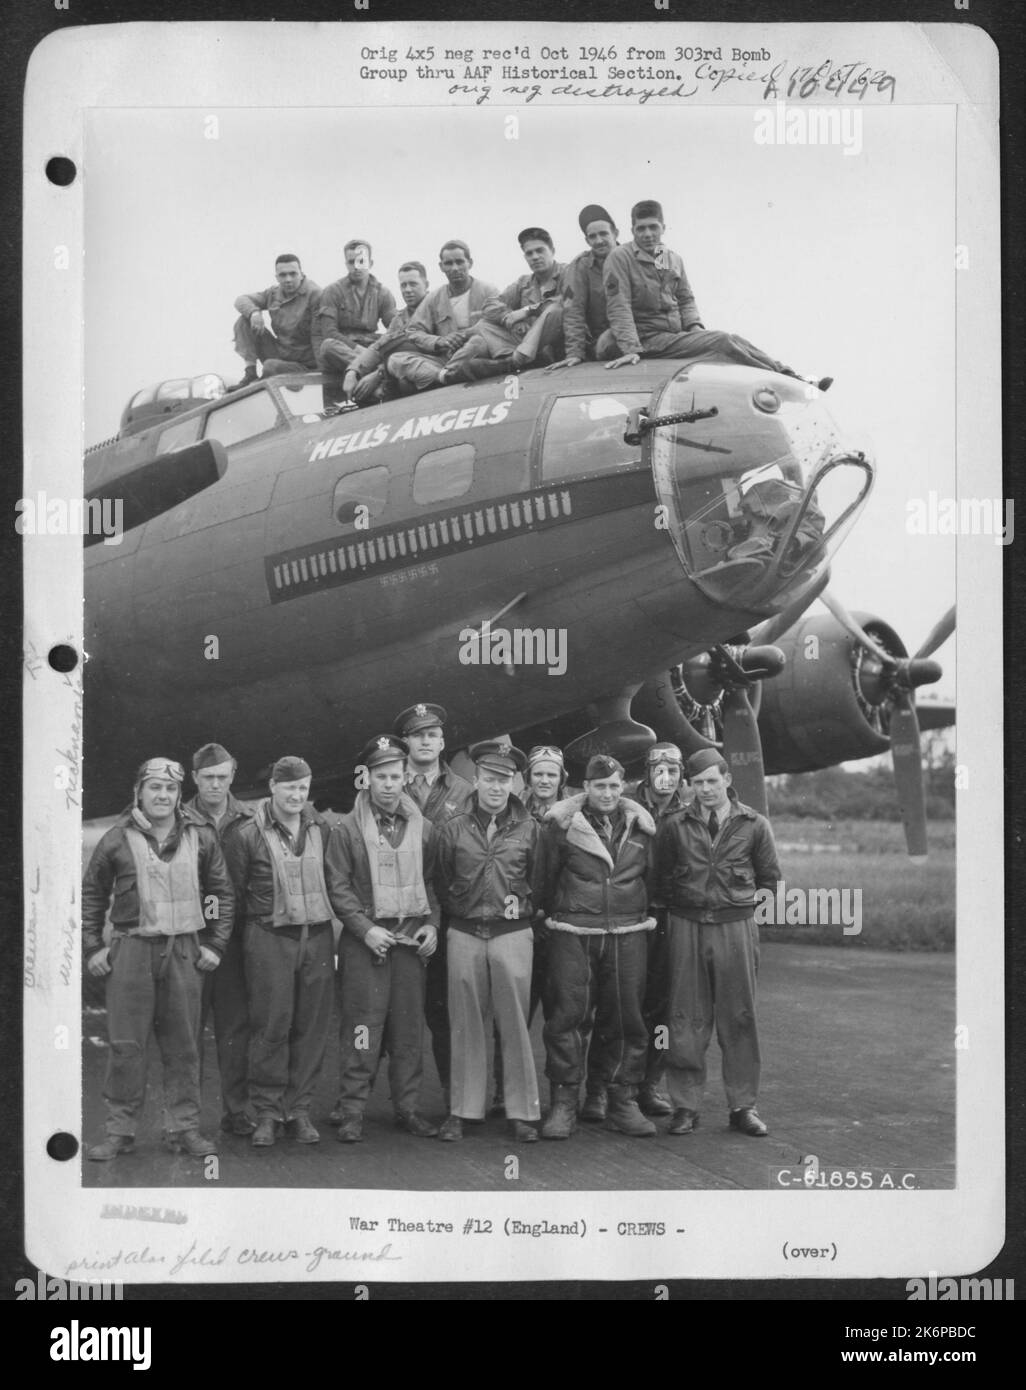 Combat And Ground Crew Of The Boeing B-17 'Flying Fortress' Hell's Angels. 303Rd Bomb Group, England. 6 June 1943. Stock Photo